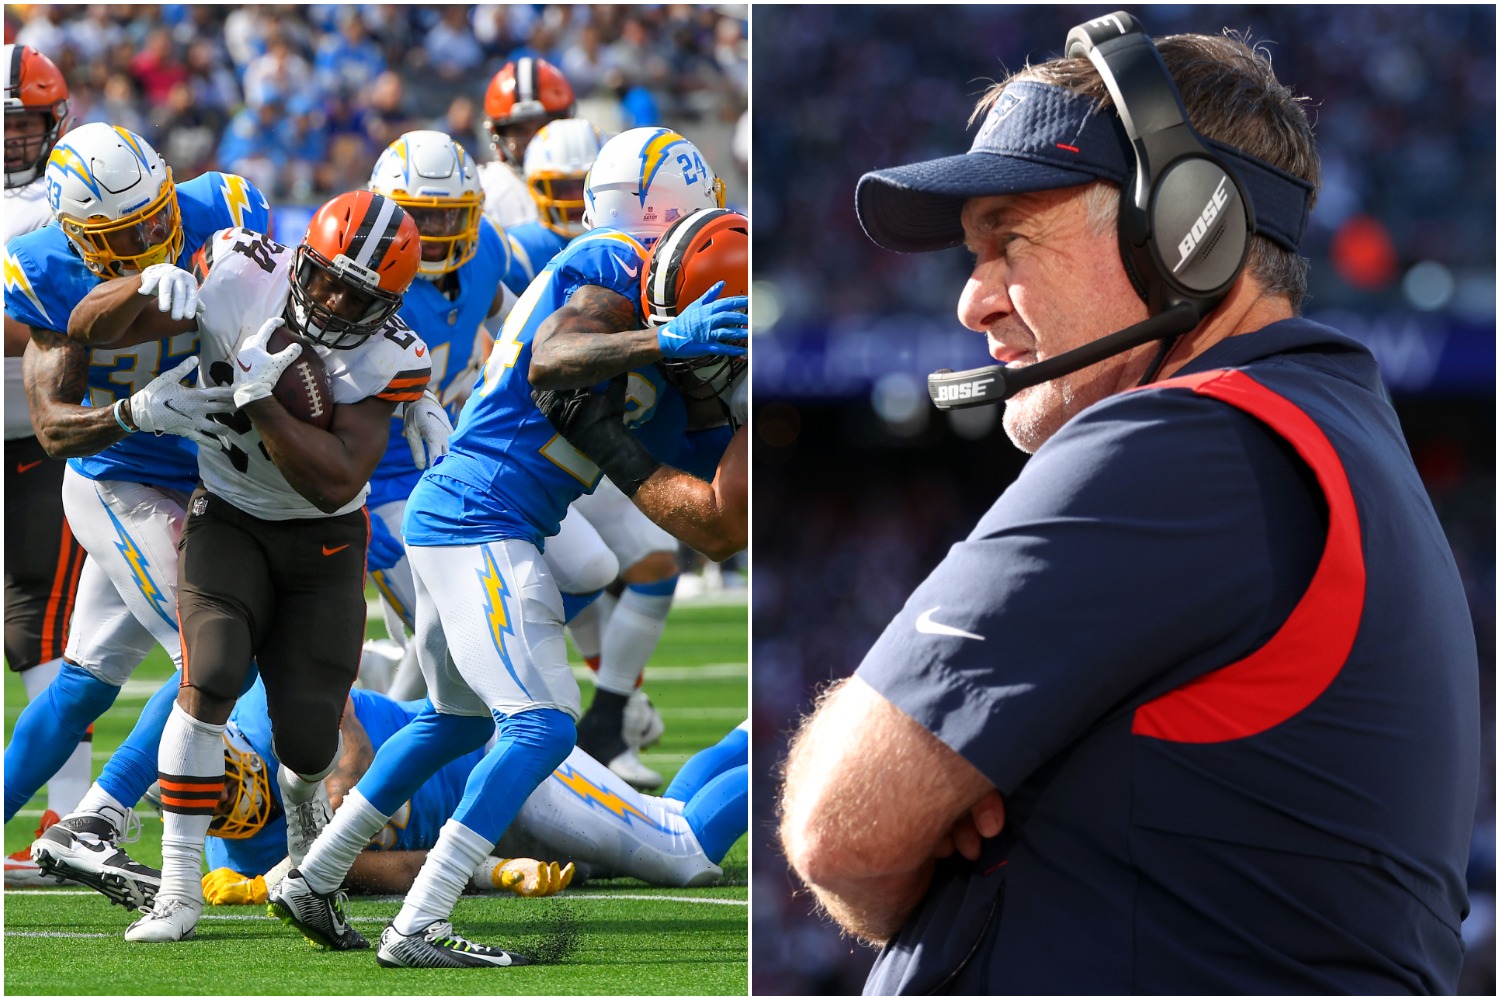 Los Angeles Chargers defenders try to stop Cleveland Browns RB Nick Chubb as New England Patriots head coach Bill Belichick watches his team play.